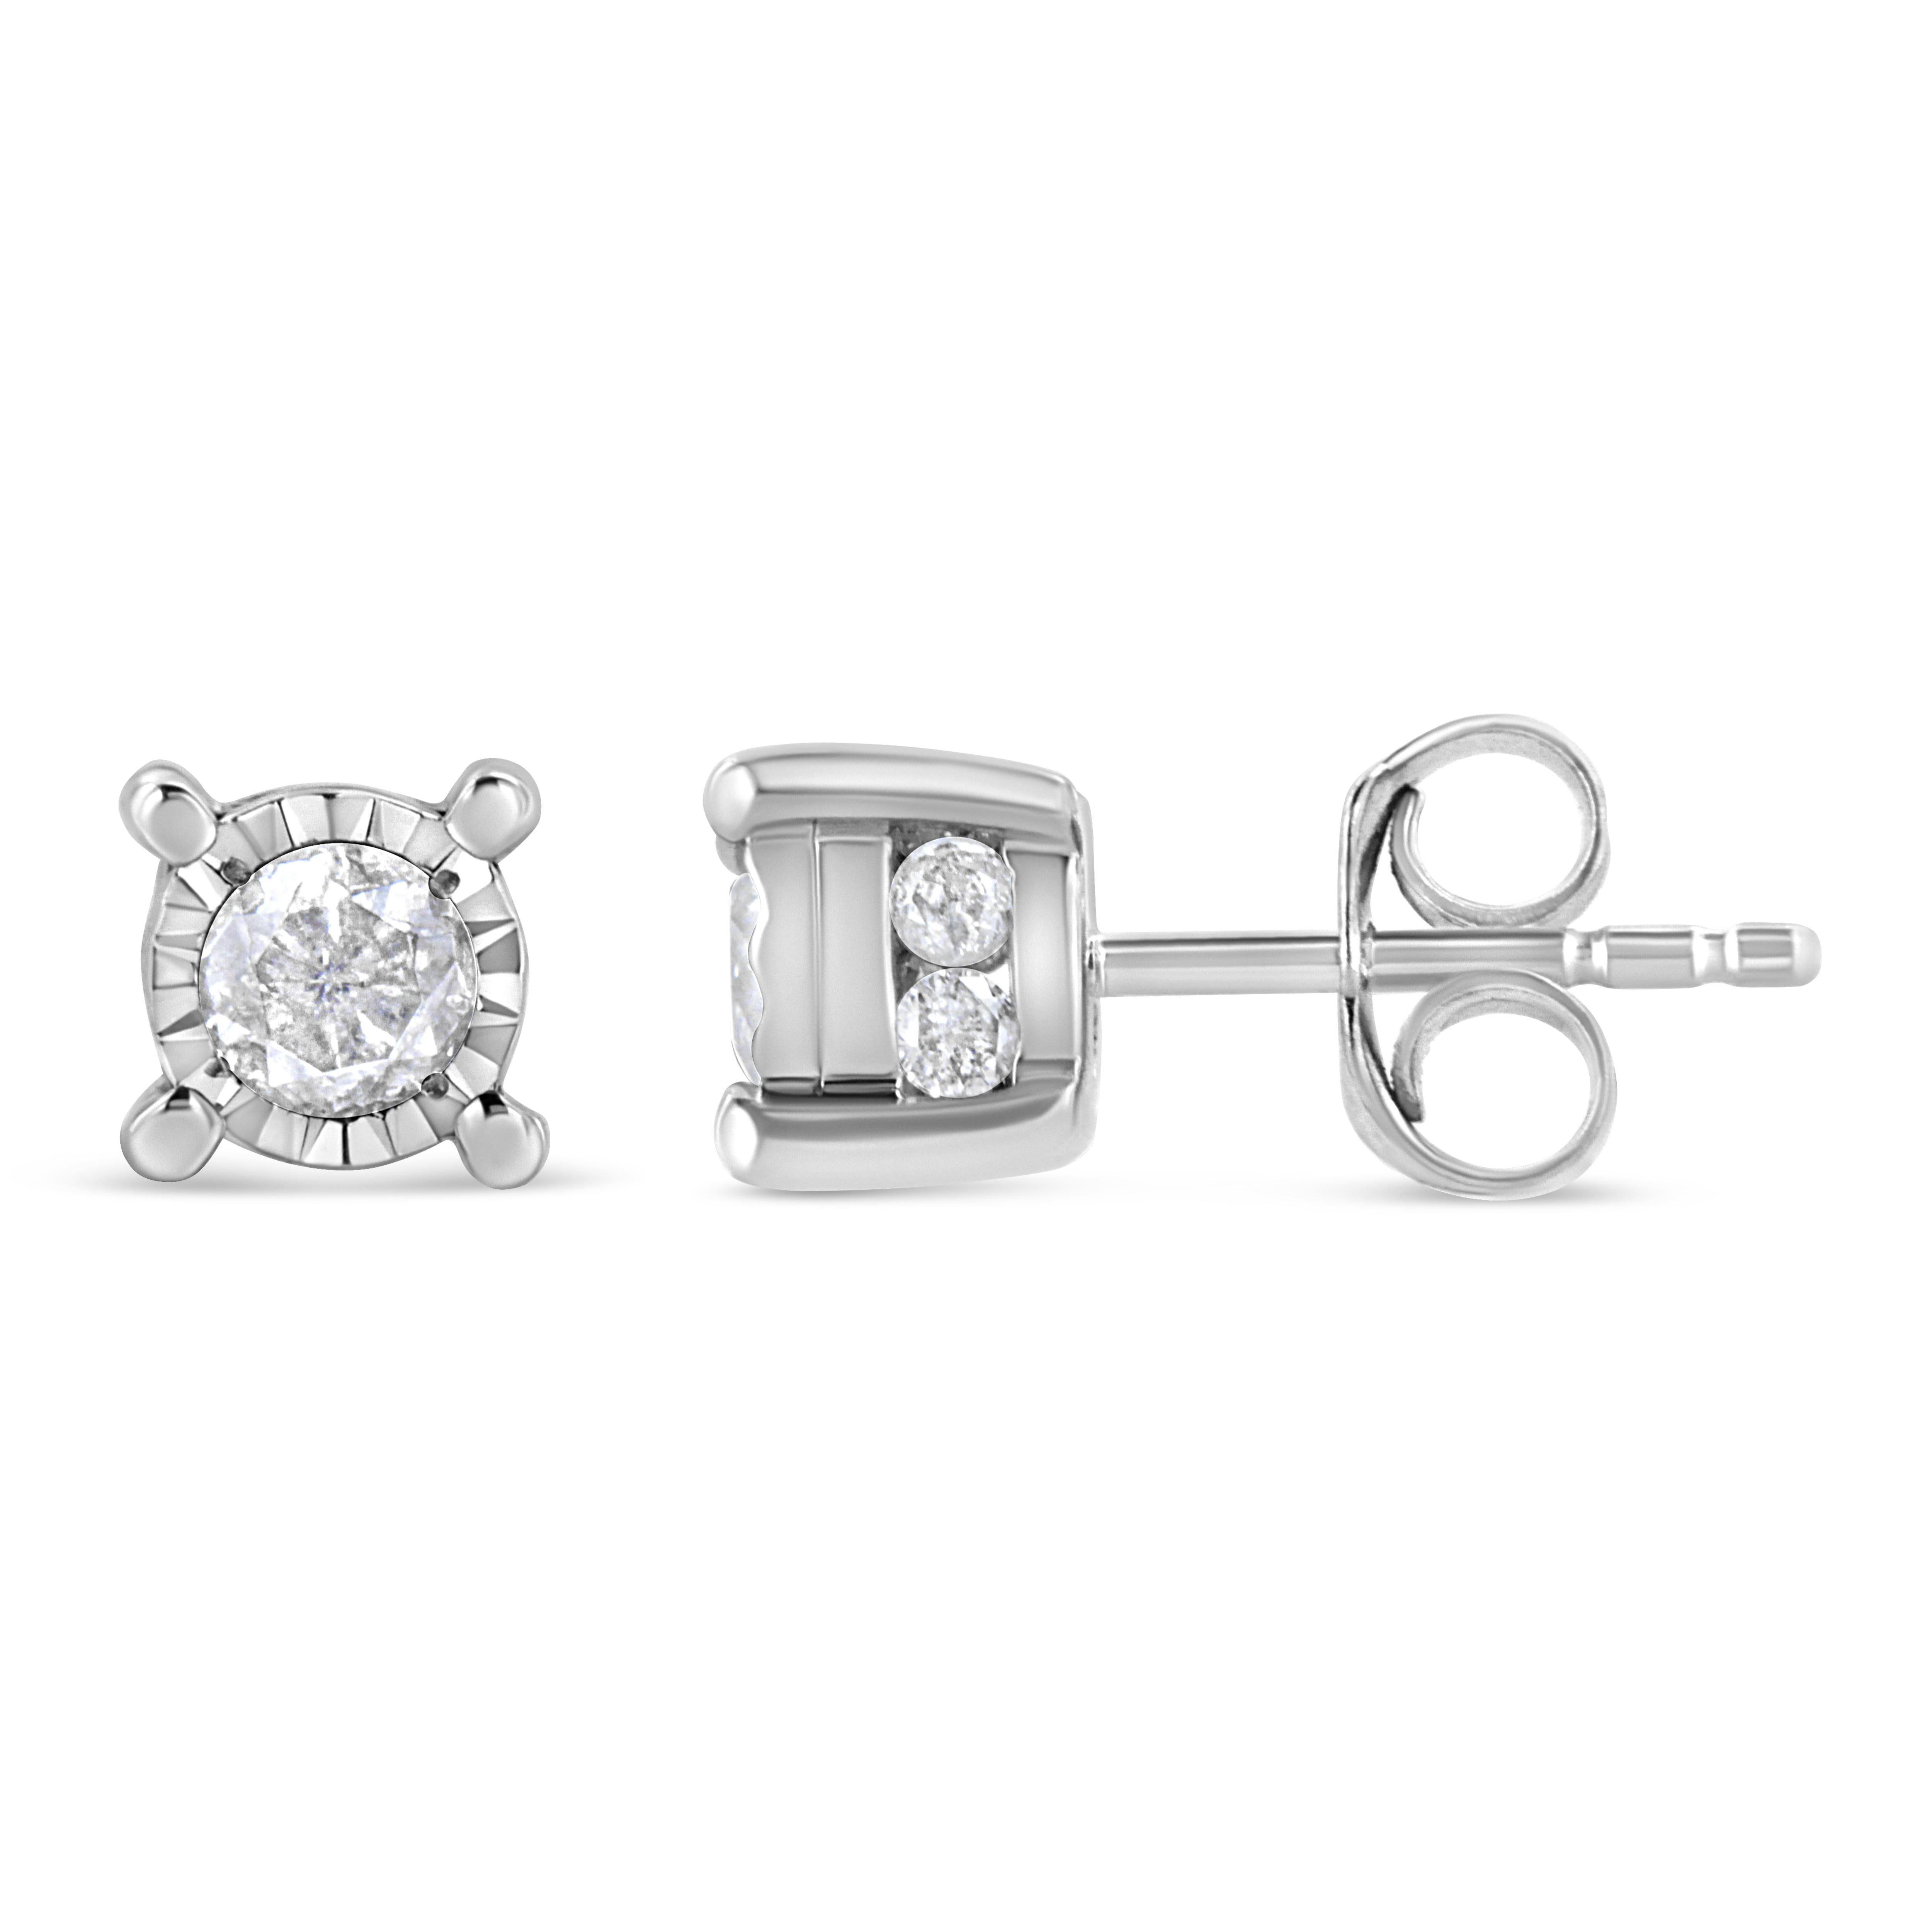 Add a shimmering touch to your wardrobe with these elegant and extravagant diamond studs earrings. The earrings feature 2 round diamonds set in a miracle plate to create a bigger diamond look. Hidden in the basket of the earrings are an 18 round